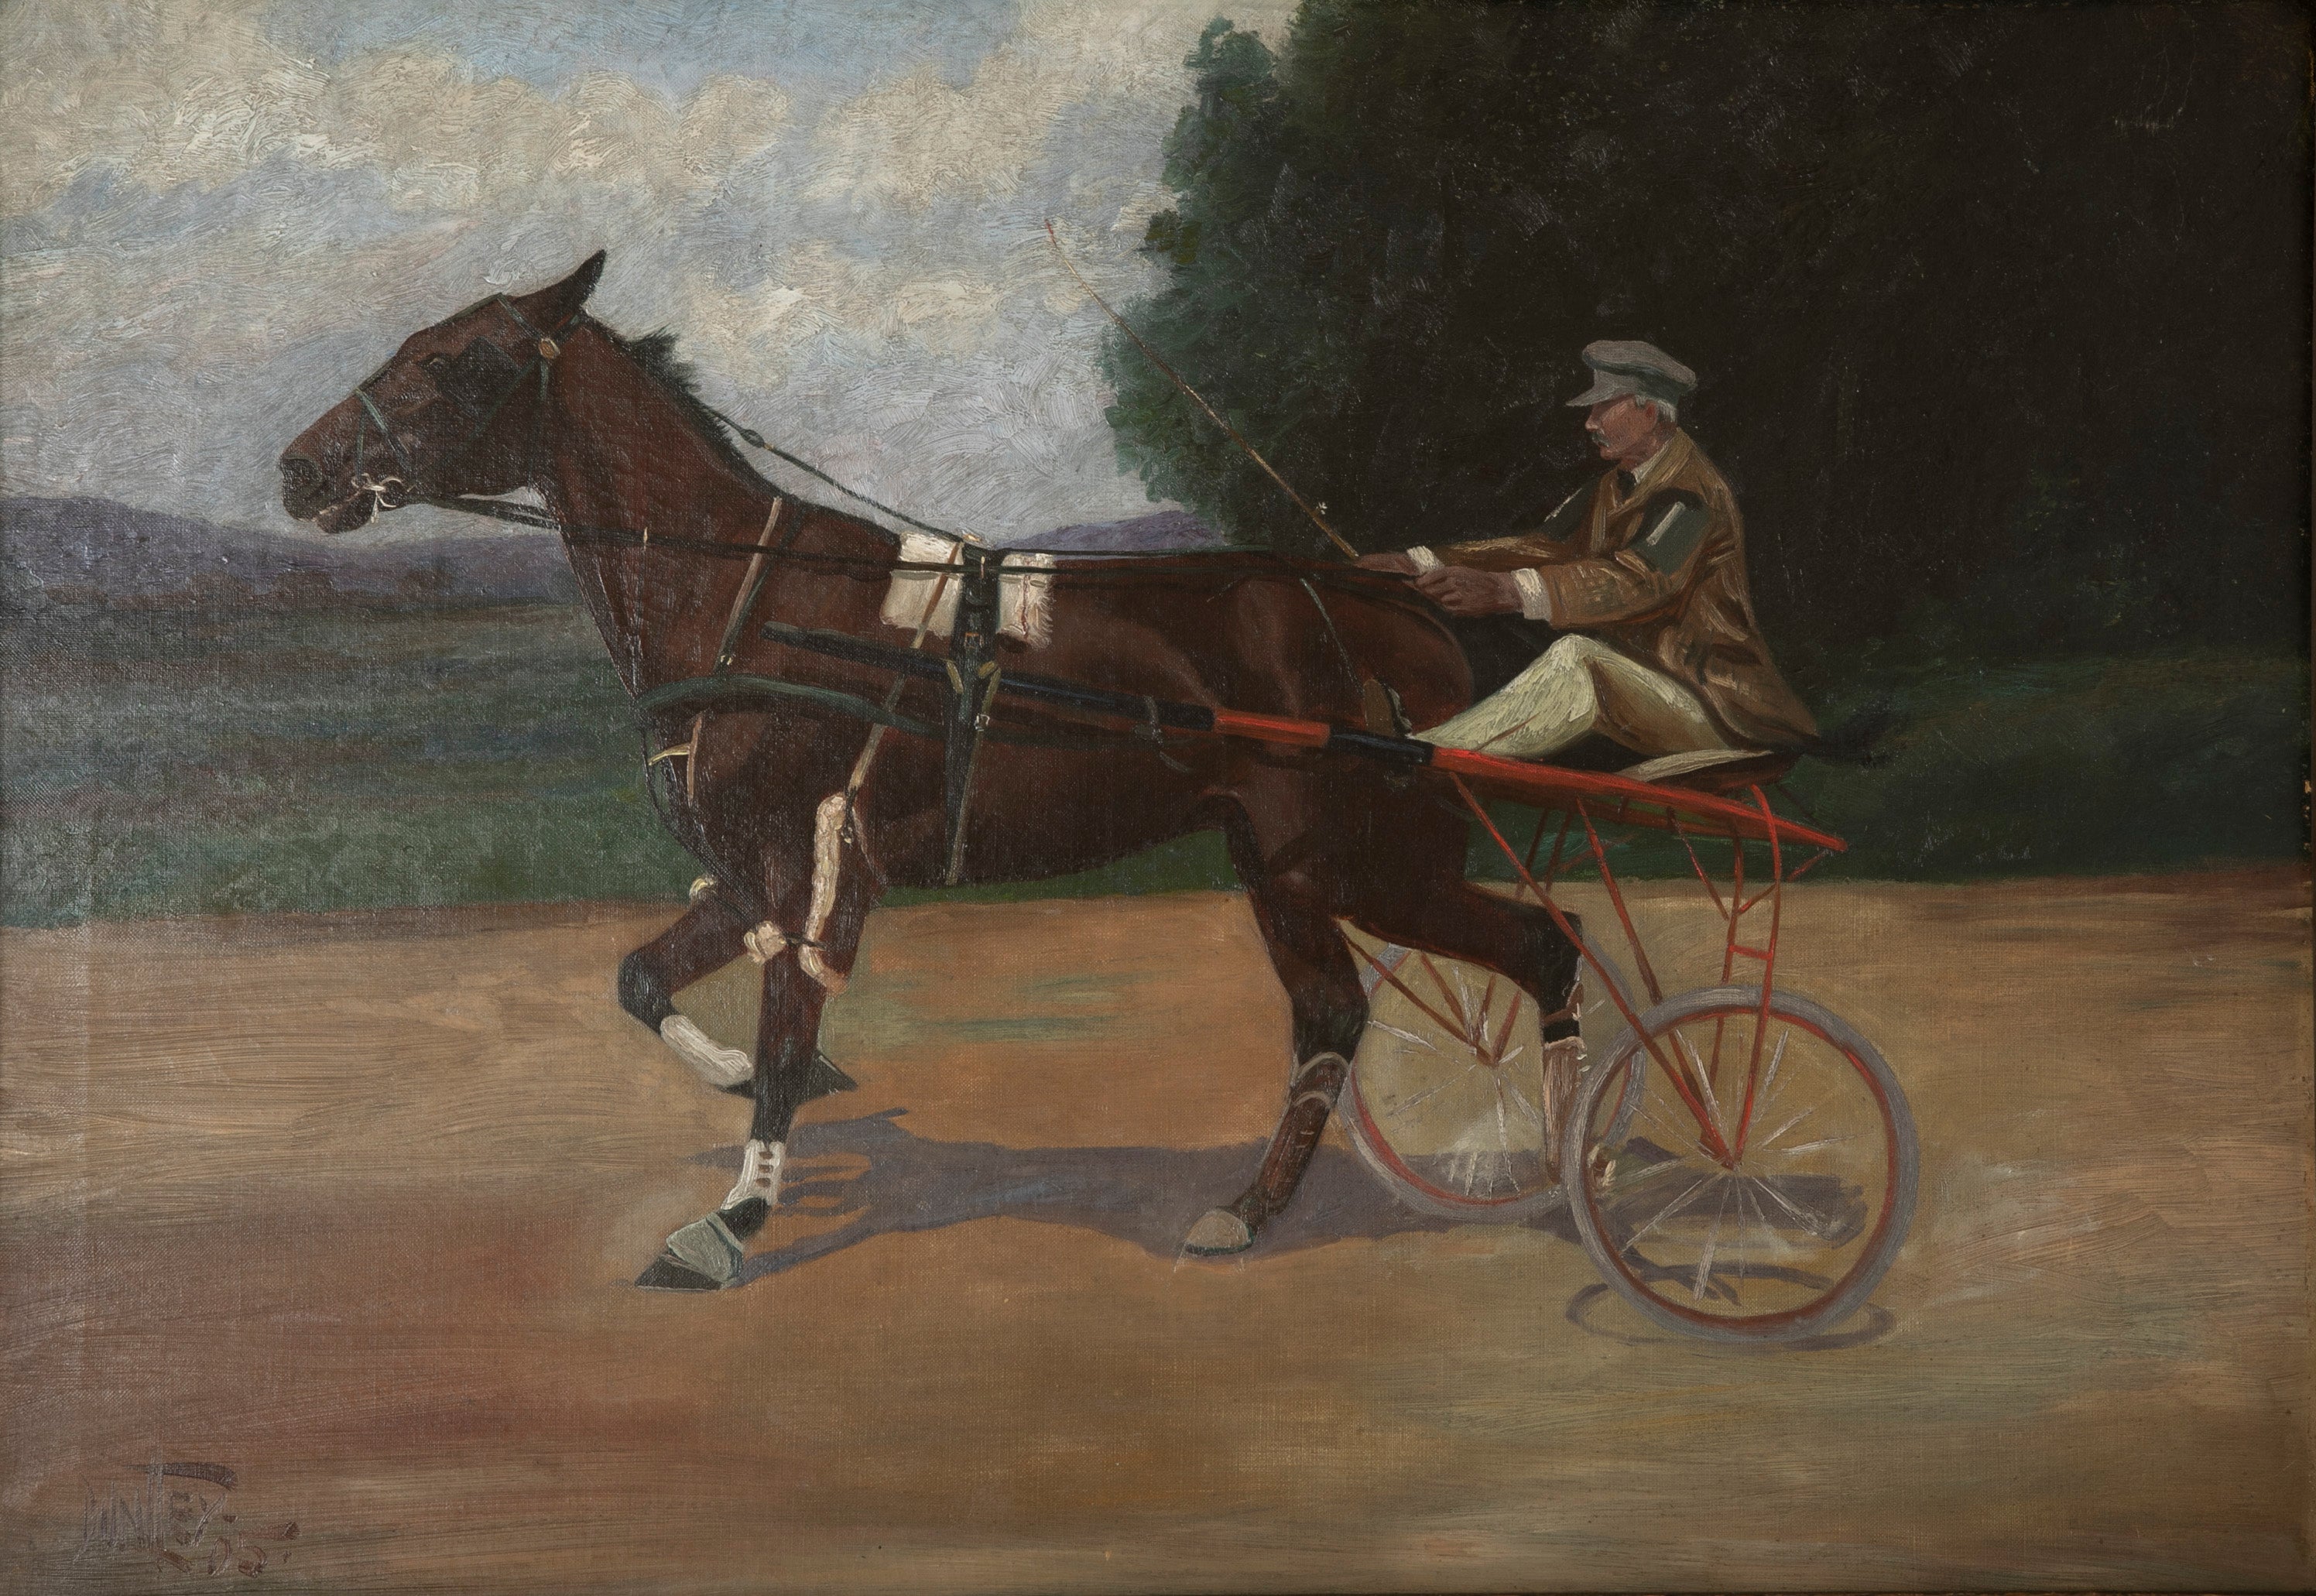 Oil on Canvas of a Horse & Sulky by American Artist Wilbur Leighton Duntley